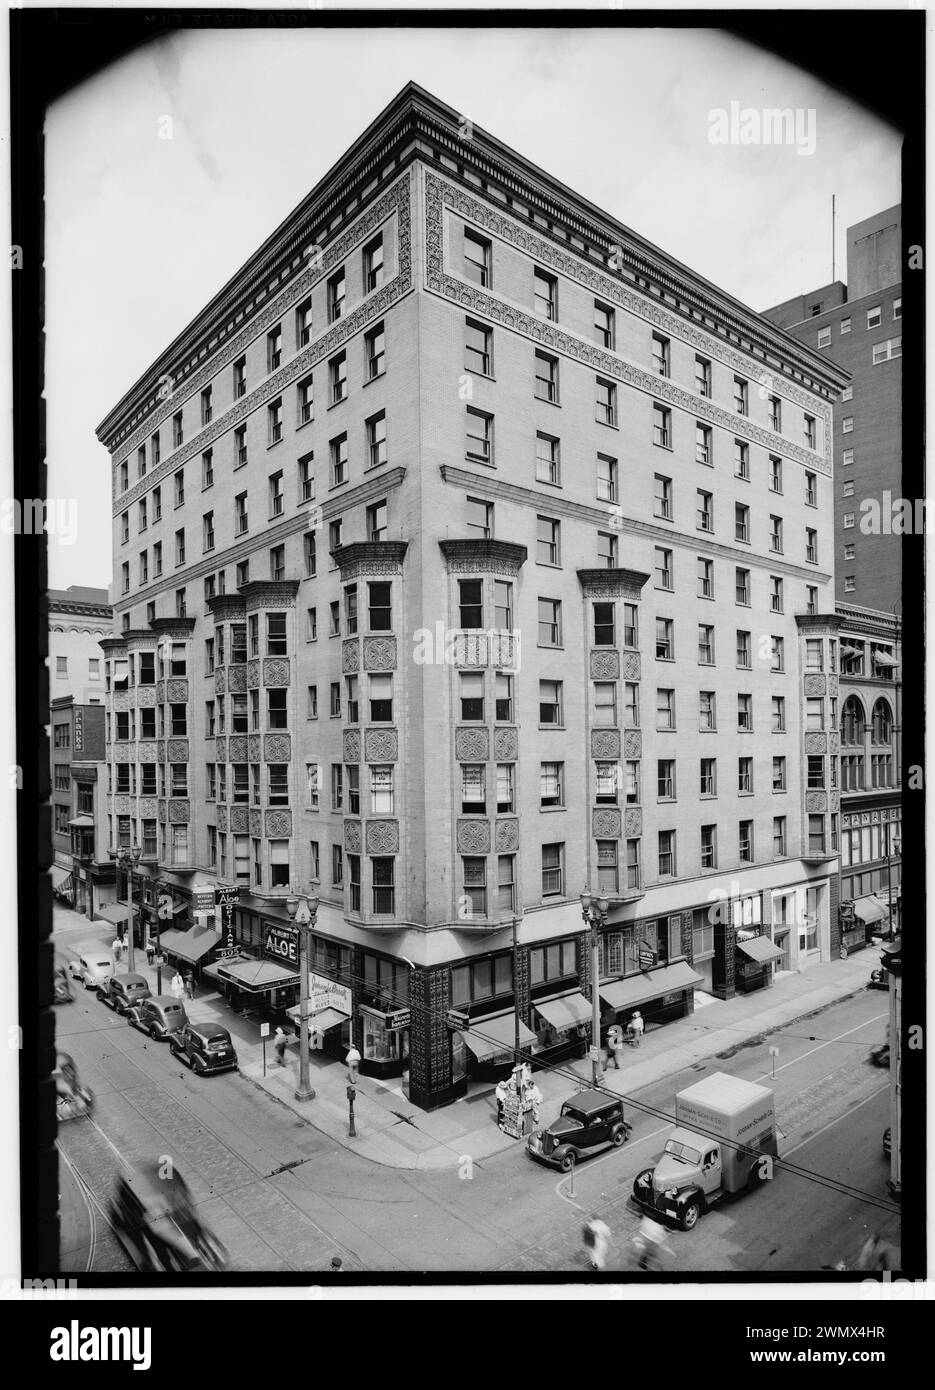 The Victoria Building (St. Nicholas Hotel) 407 North Eighth Street. (Northwest corner of Eighth and Locust Streets)Photograph 1940s  Designed by Louis Sullivan Stock Photo